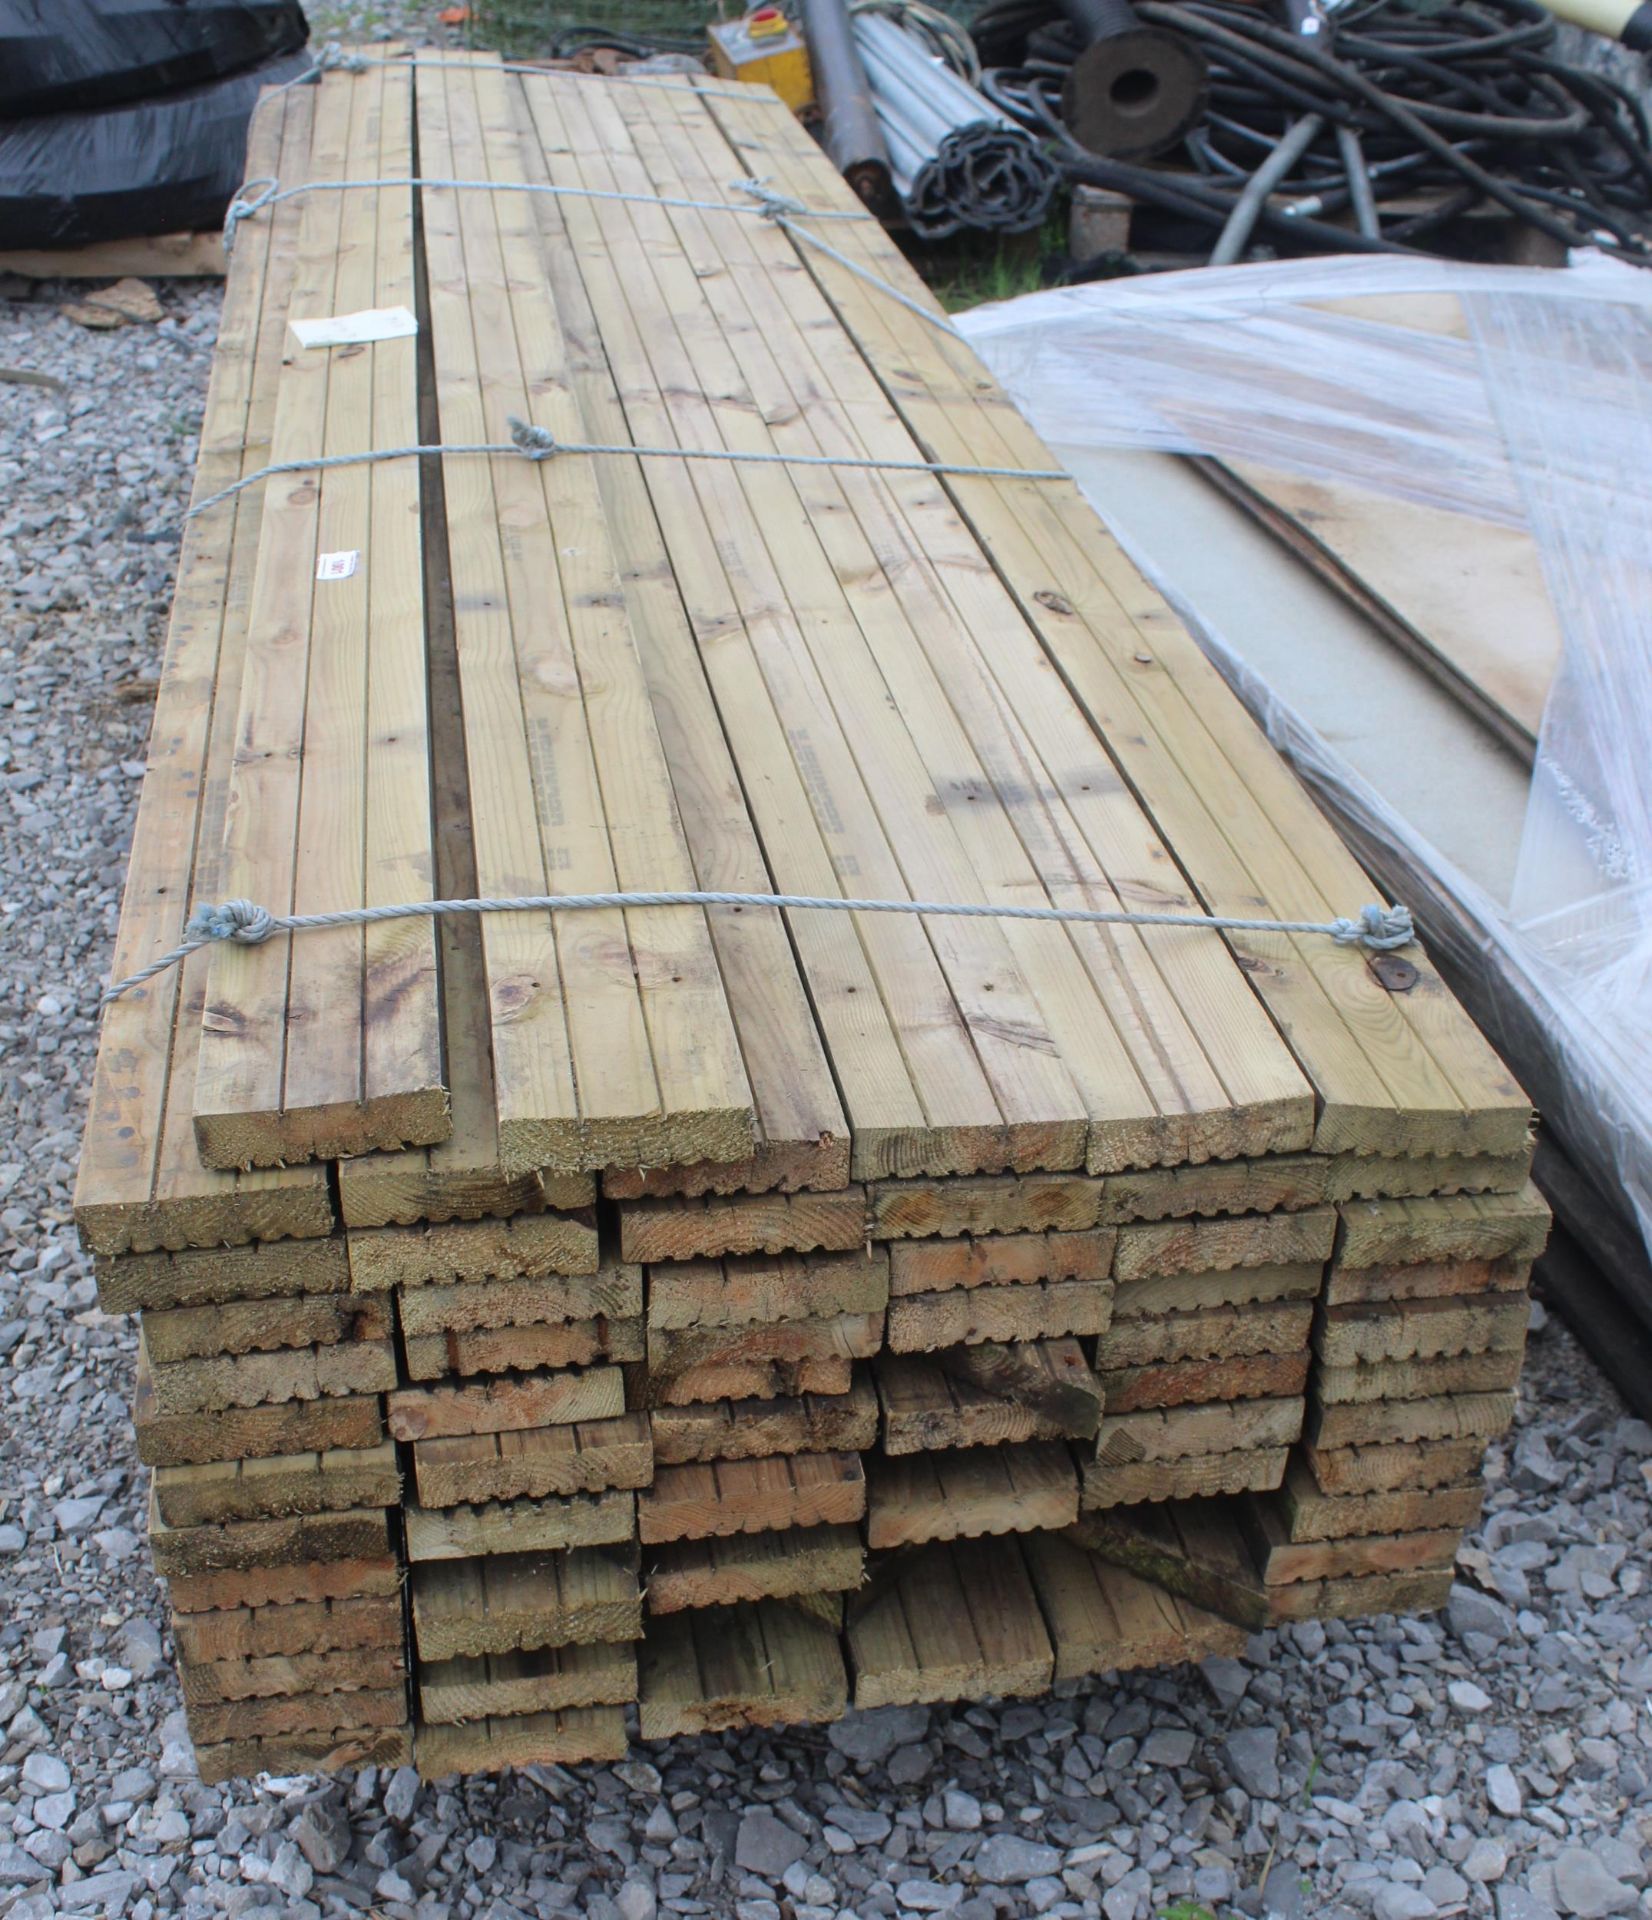 70 PIECES OF DECKING 9' LONG 4 3/4 WIDE NO VAT